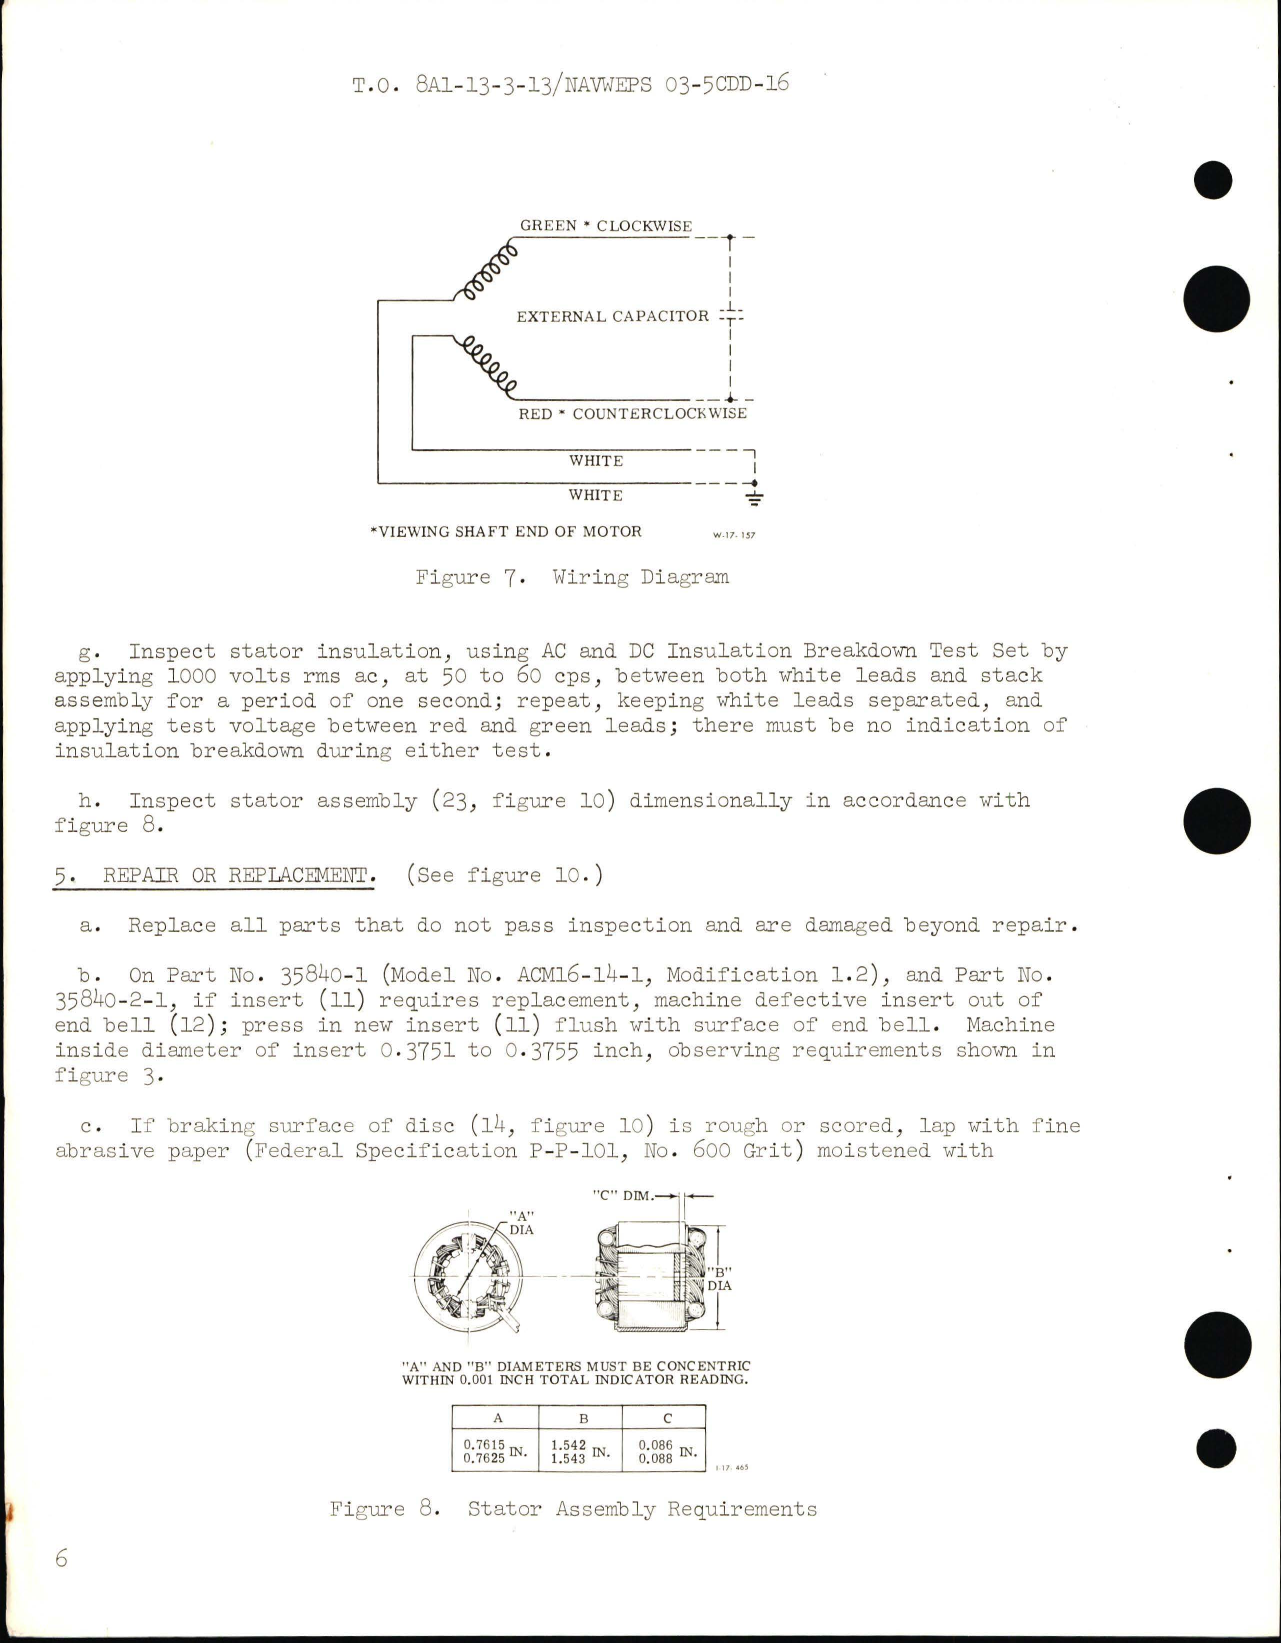 Sample page 6 from AirCorps Library document: Overhaul Instructions with Parts Breakdown for Aircraft Alternating Current Motors - Parts 35840, 35840-1 and 35840-2-1